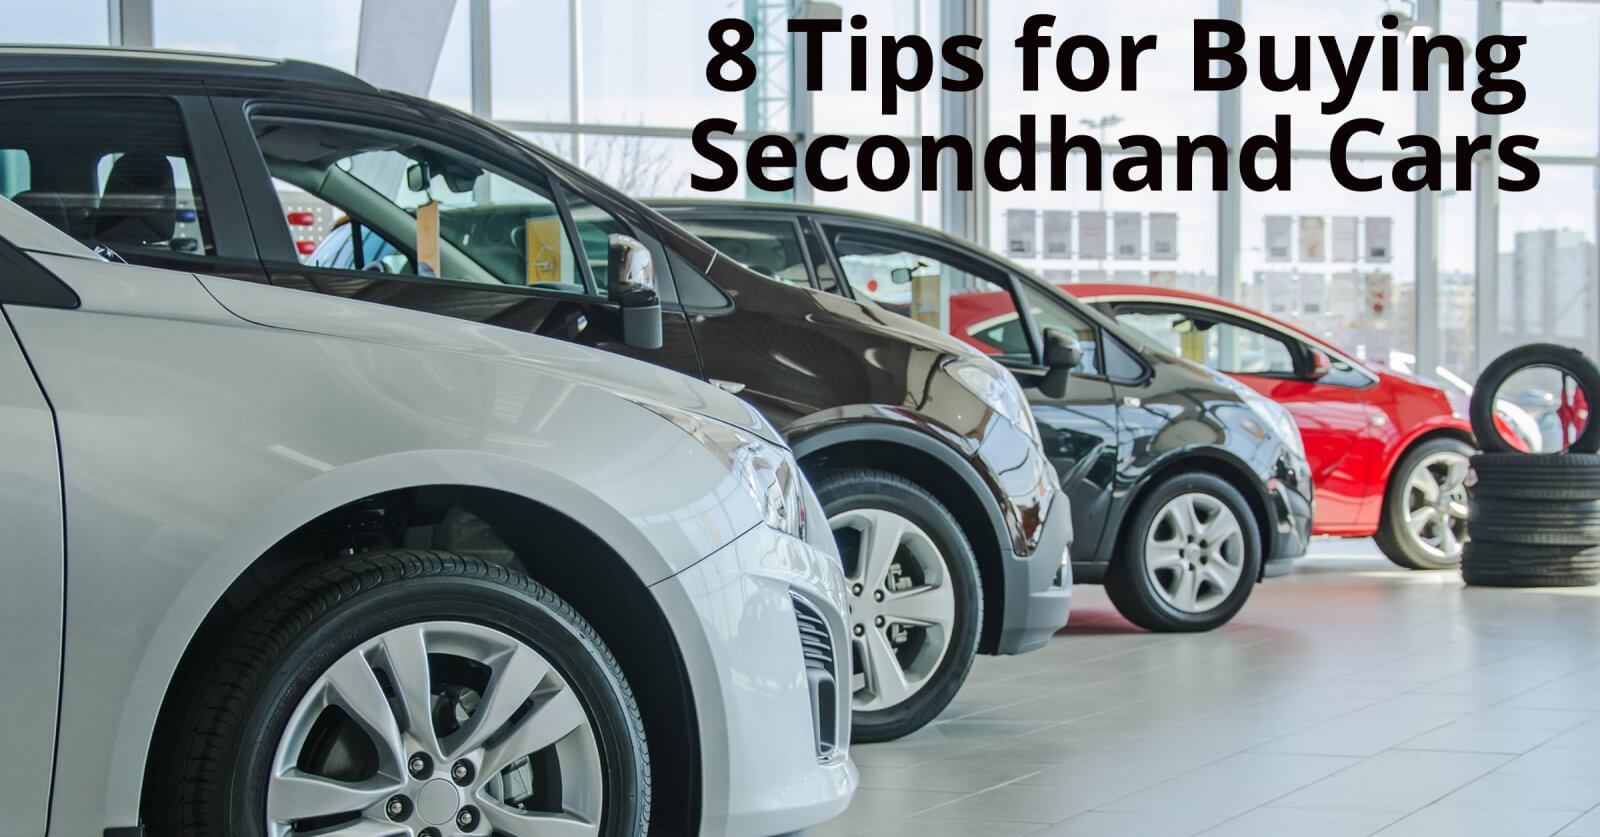 8 tips for buying secondhand cars.